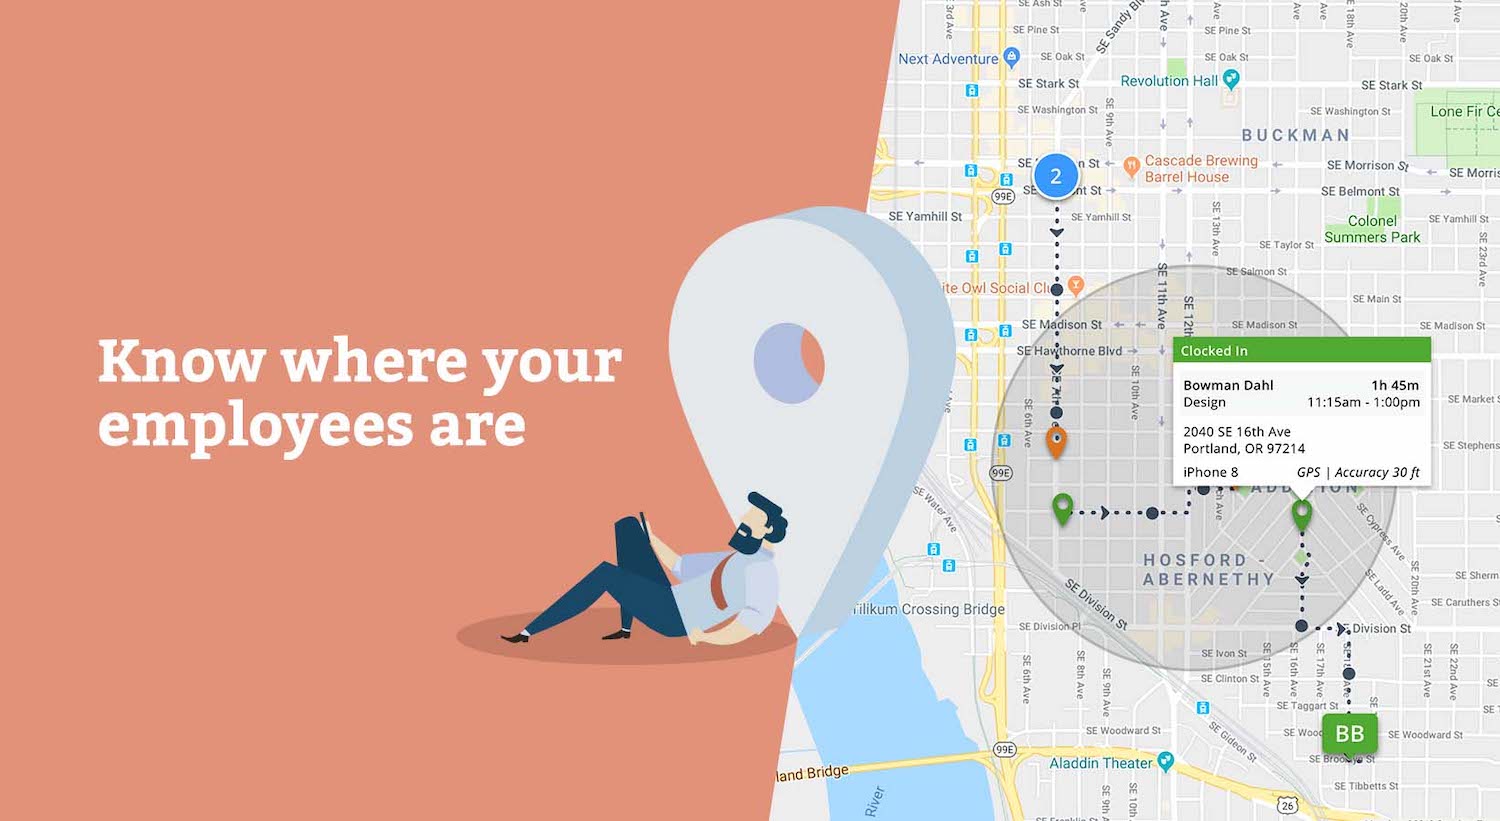 Know where your employees are in real-time with GPS tracking.